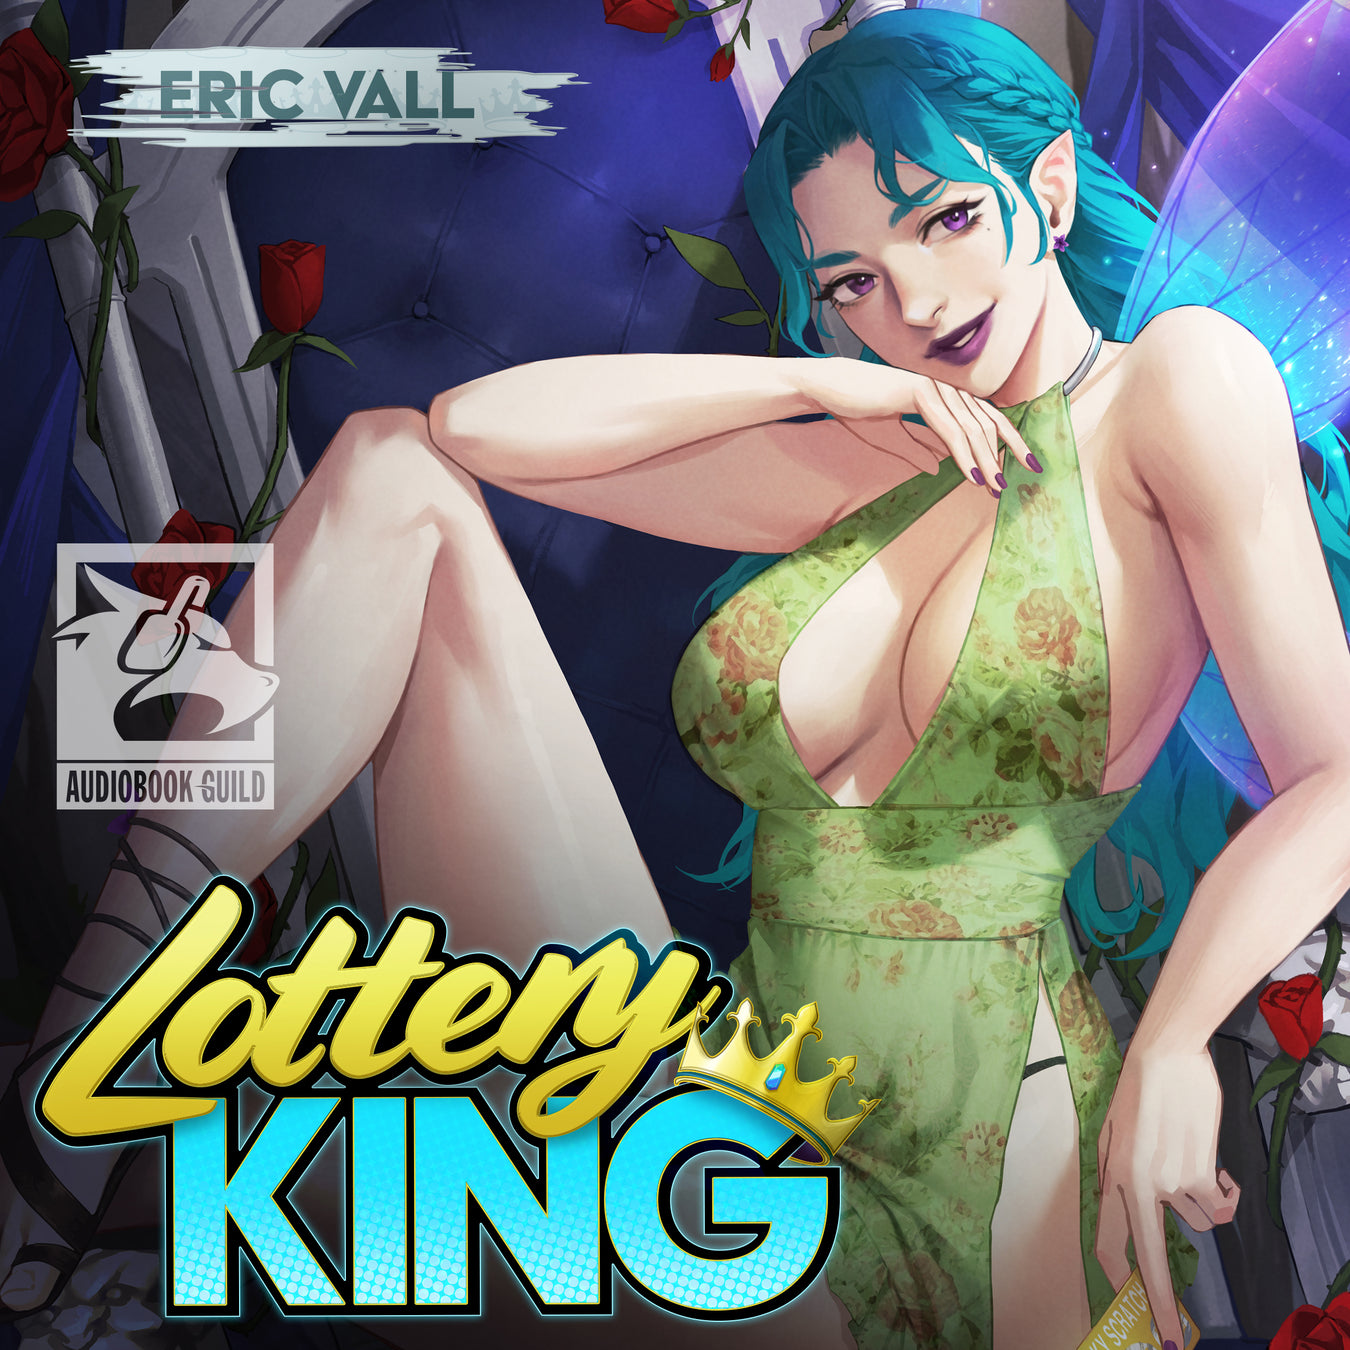 Lottery King by Eric Vall